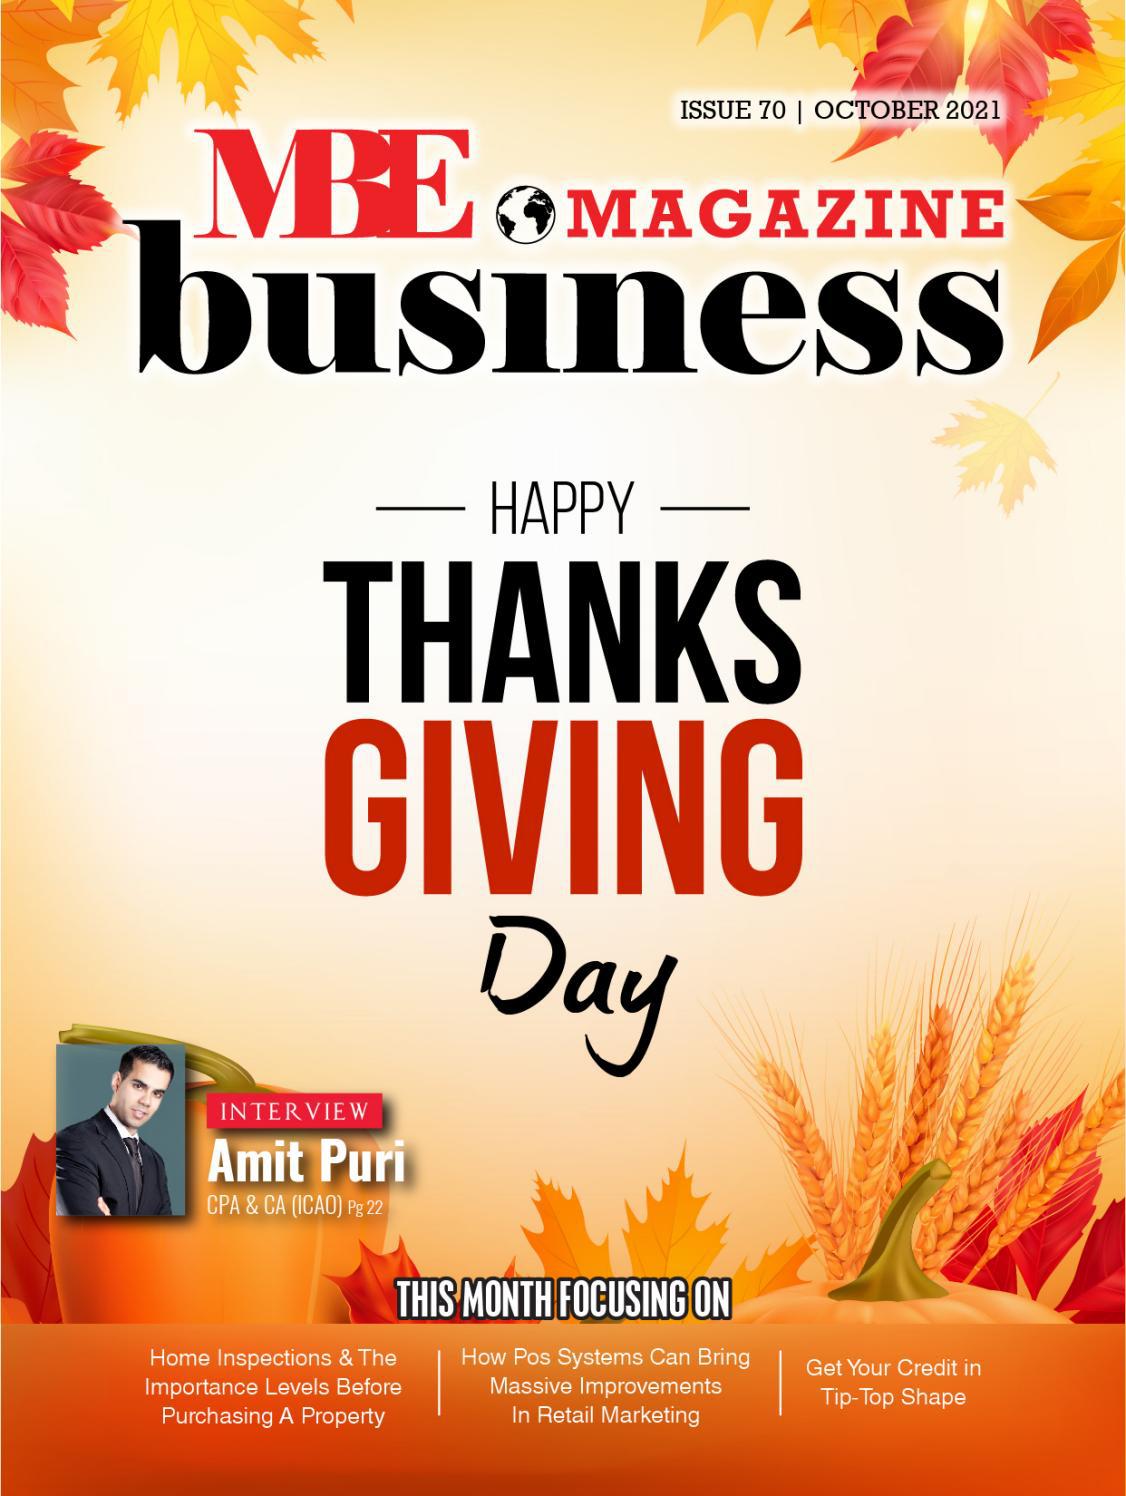   HAPPY THANKSGIVING DAY 2021 - MBE BUSINESS MAGAZINE